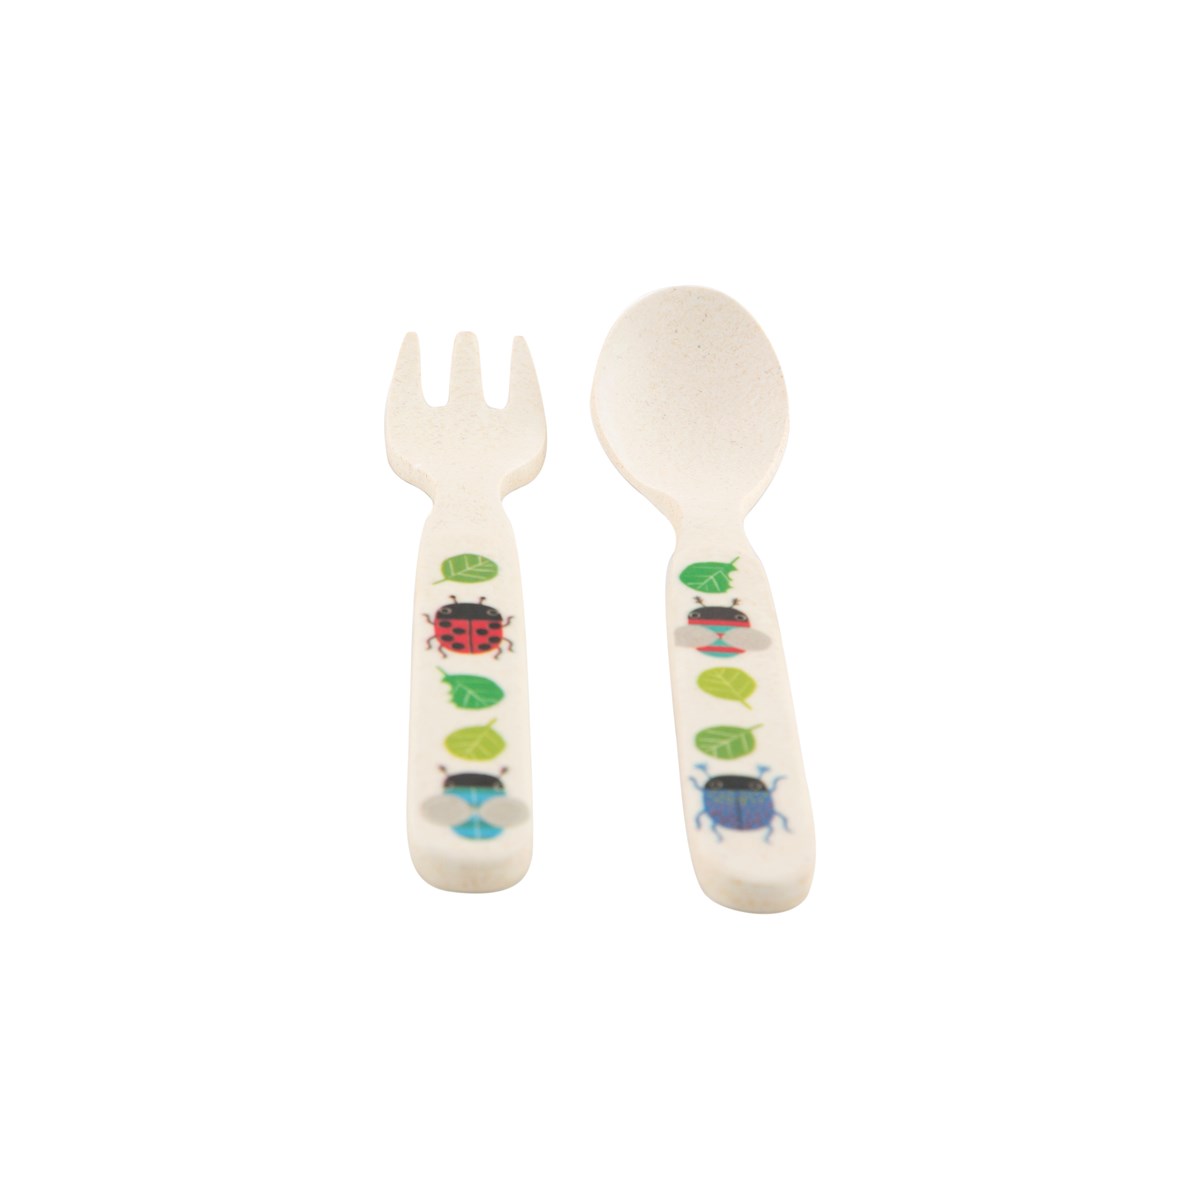 Explore nature with this gorgeous bamboo cutlery set (fork and spoon) featuring a fun 'busy bugs' design.